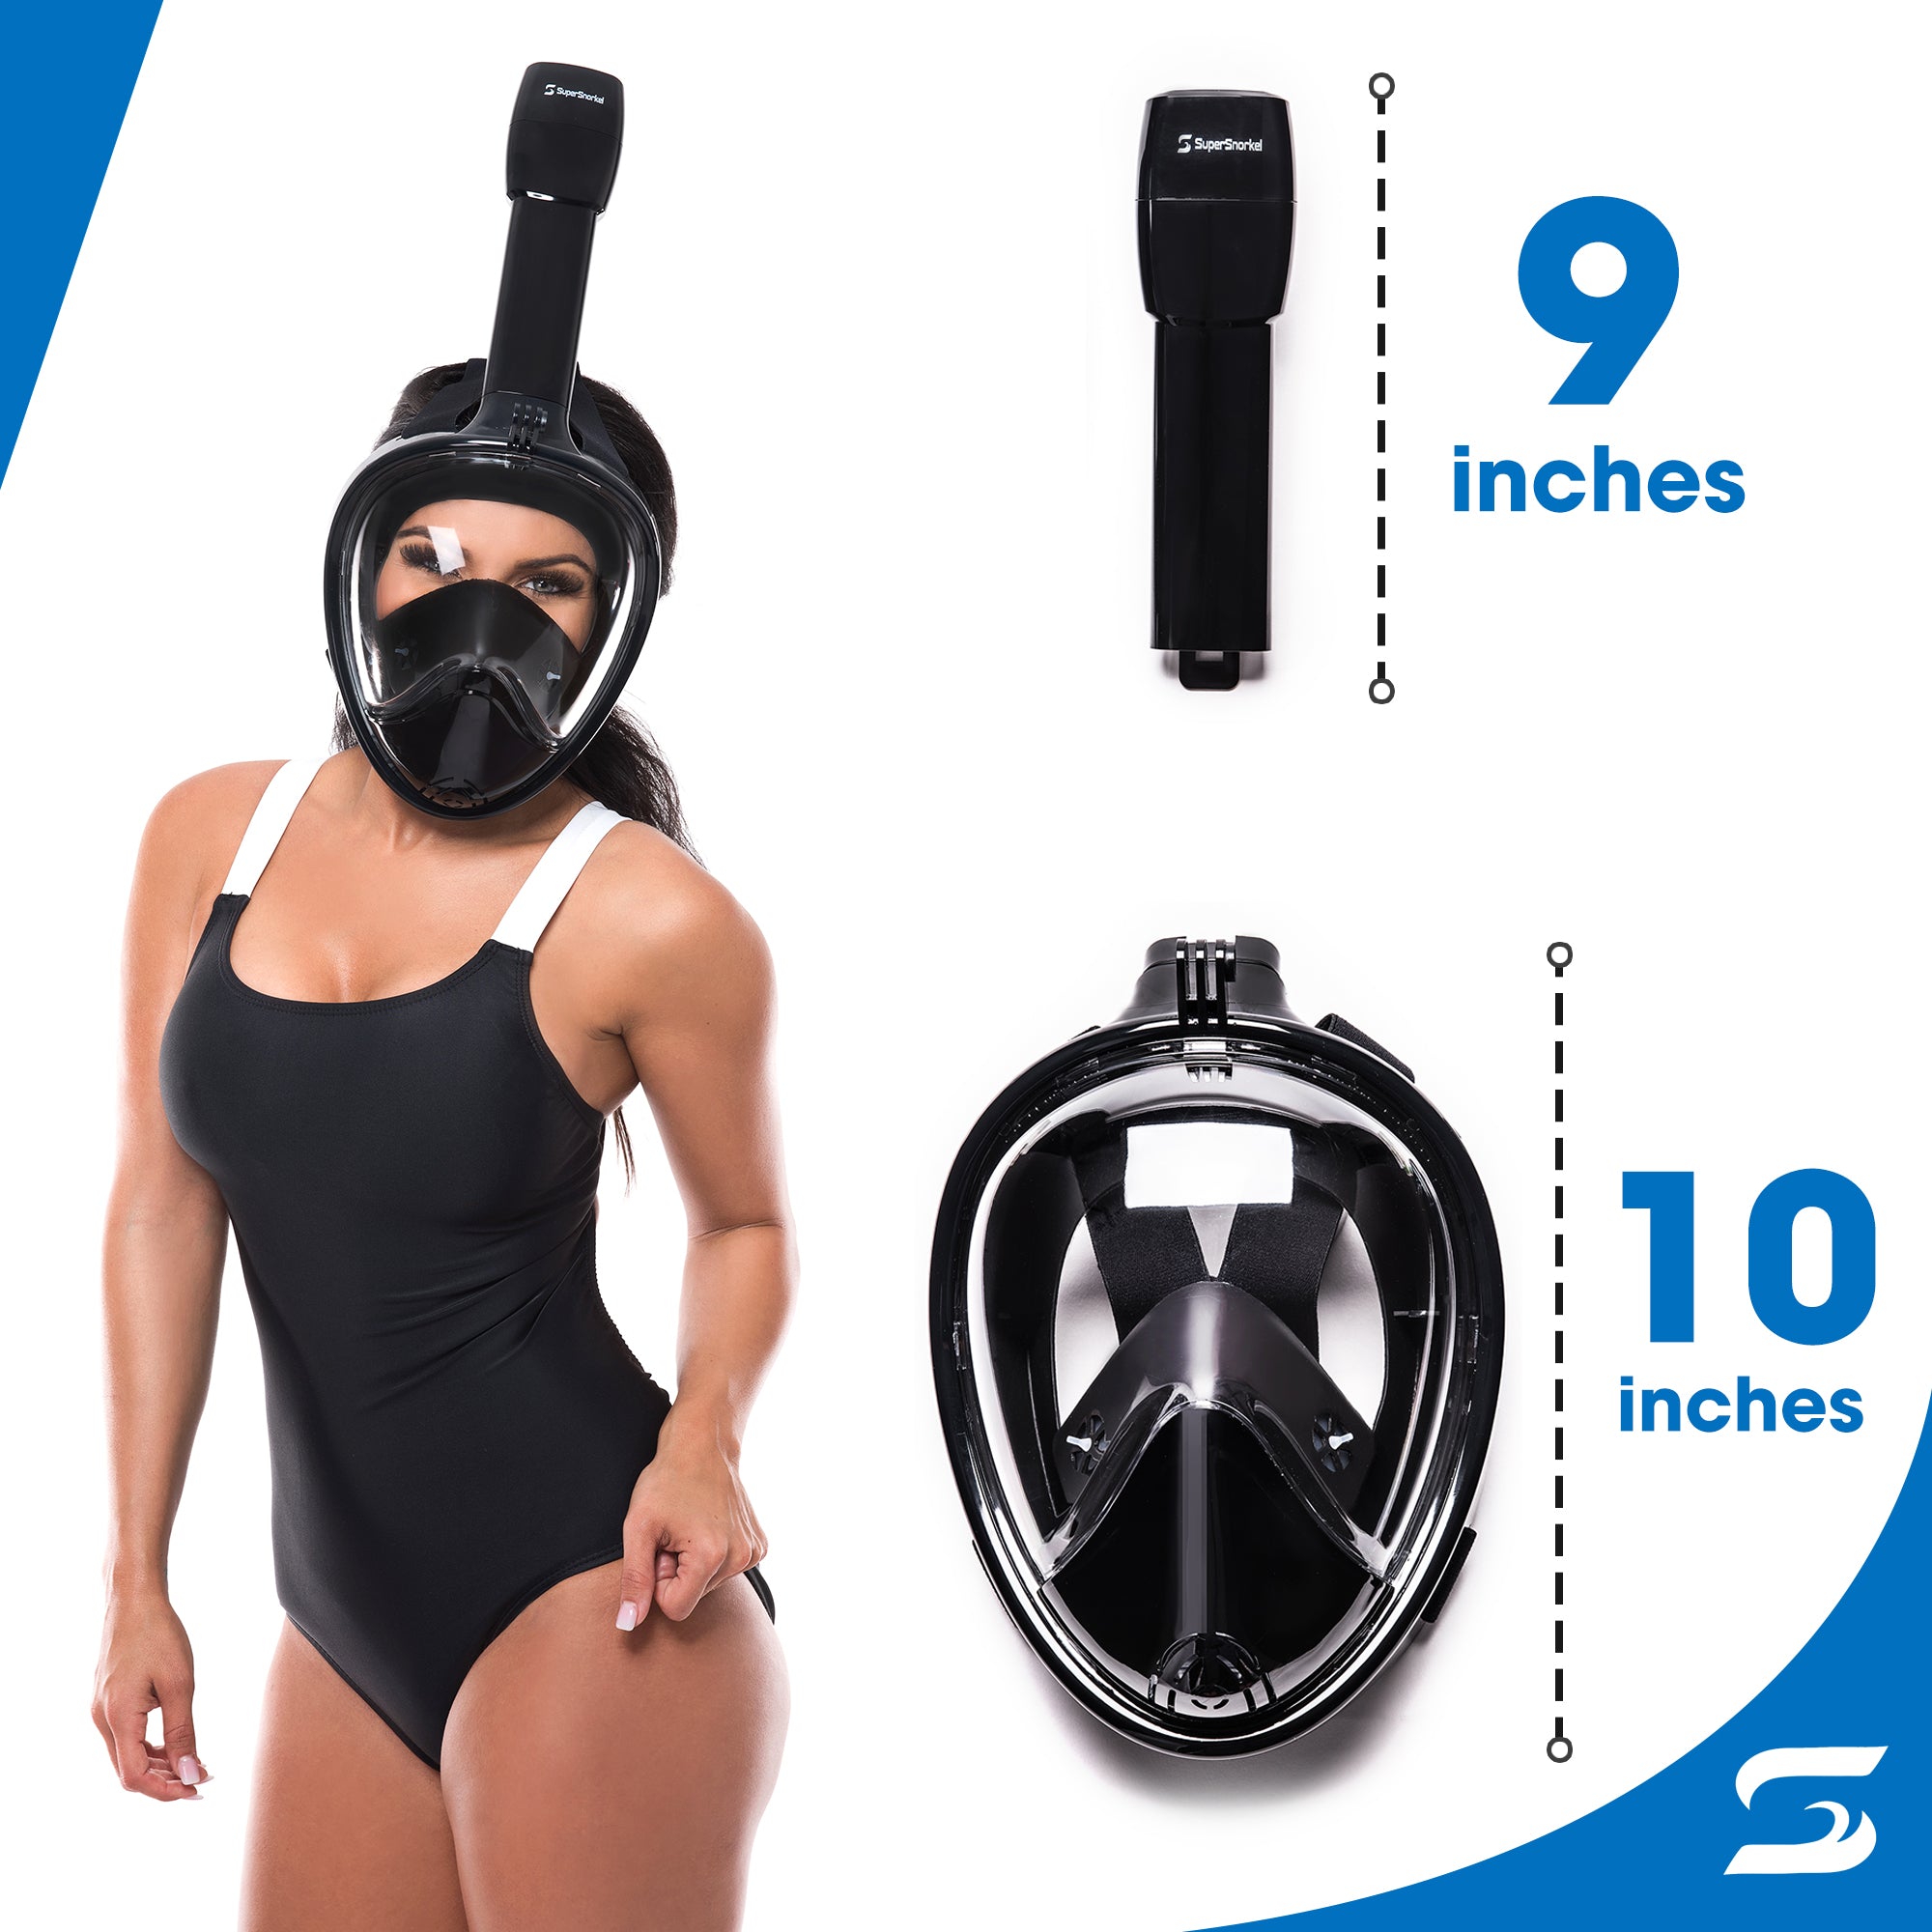 The SuperSnorkel Full face Snorkeling Mask